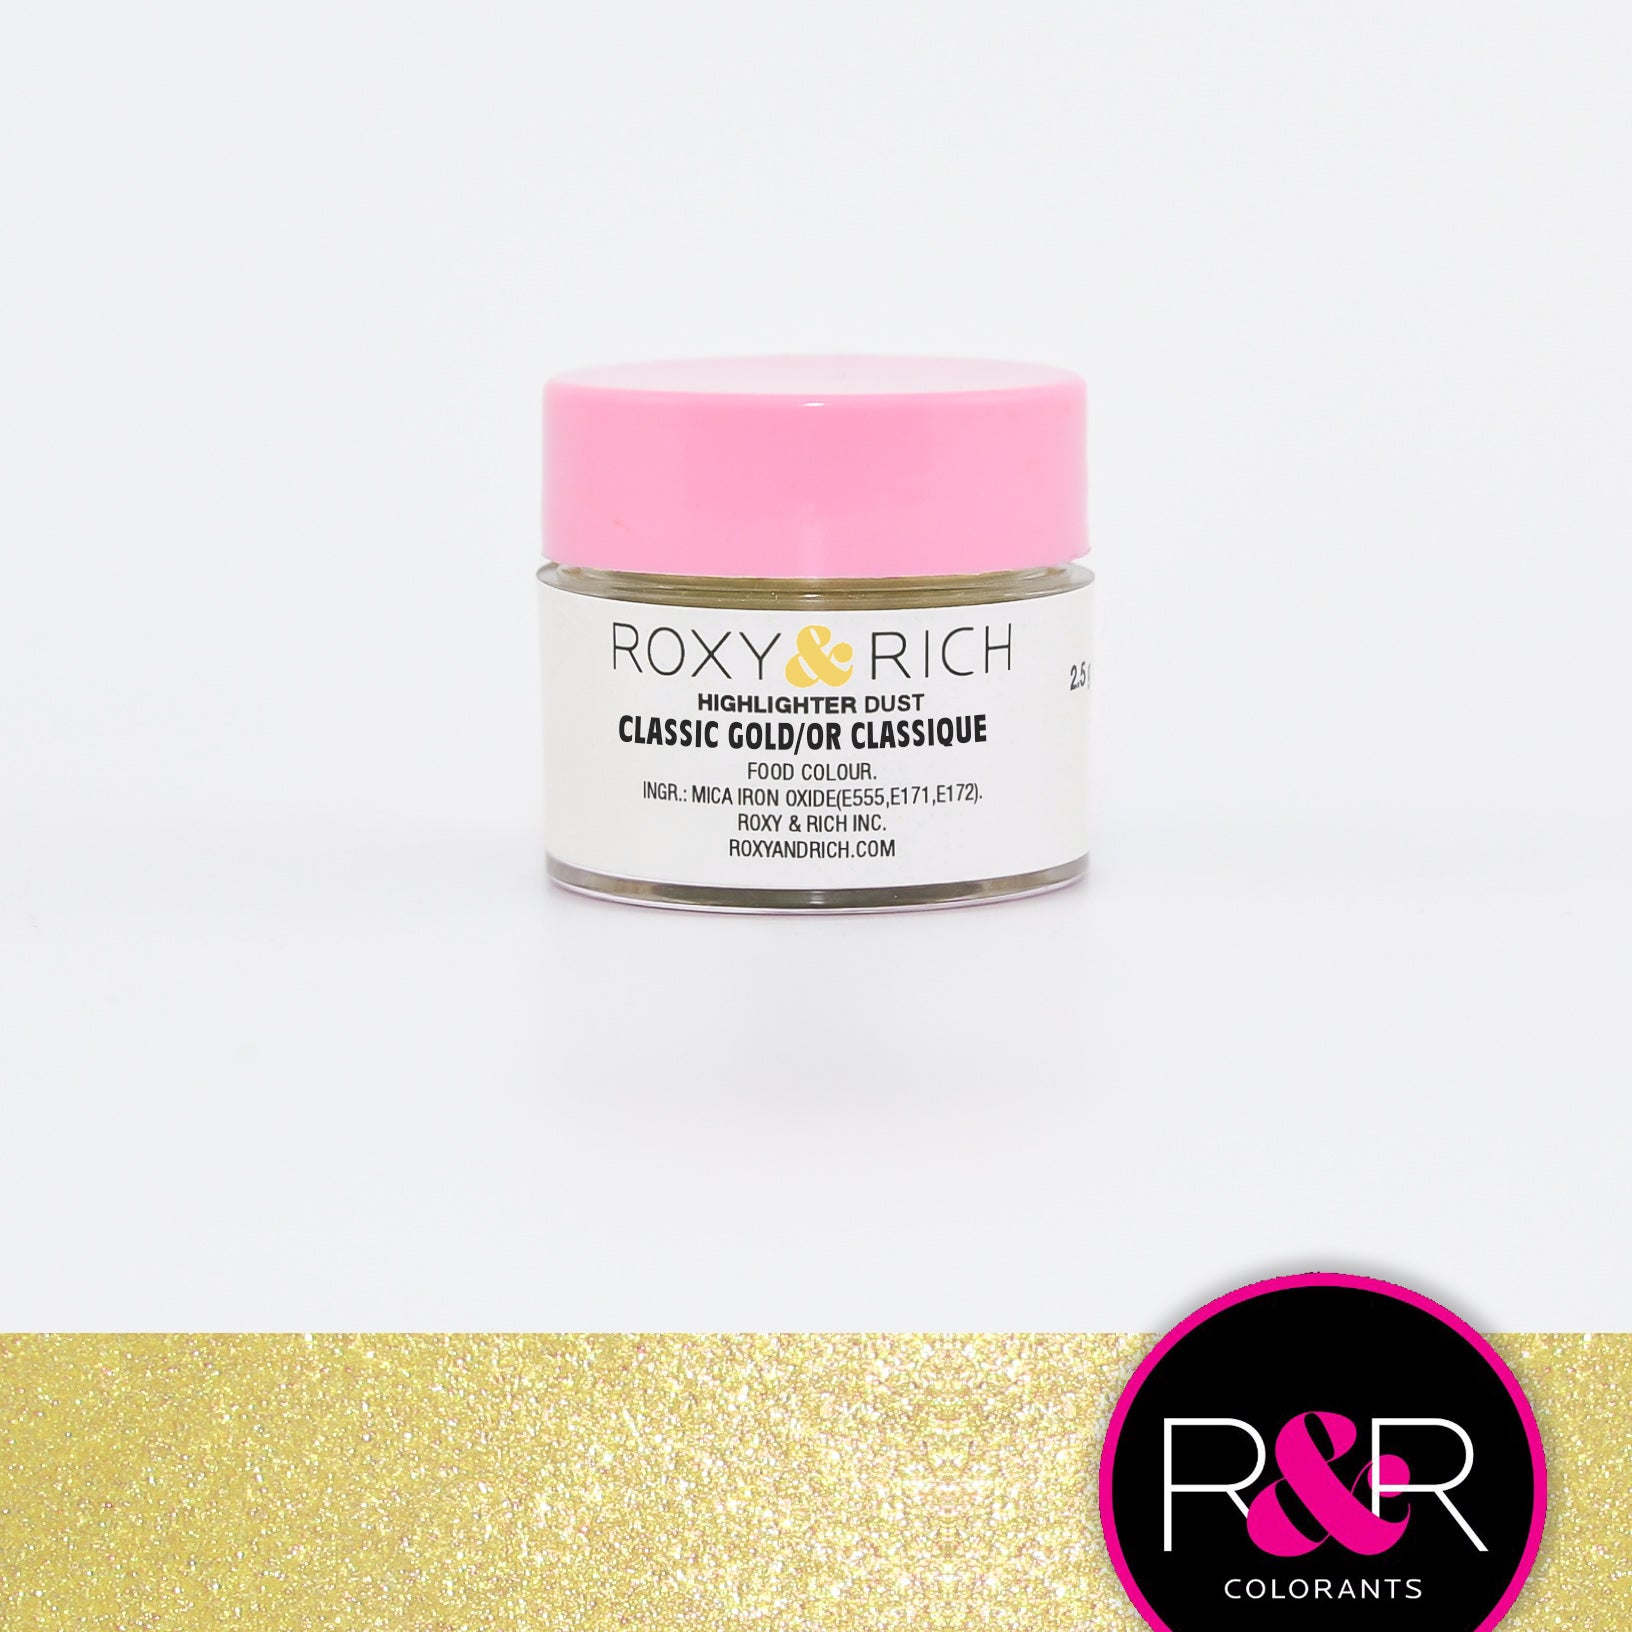 Poudre Highlighter couleur Or Classique    - Roxy & Rich - Poudre Highlighter - 